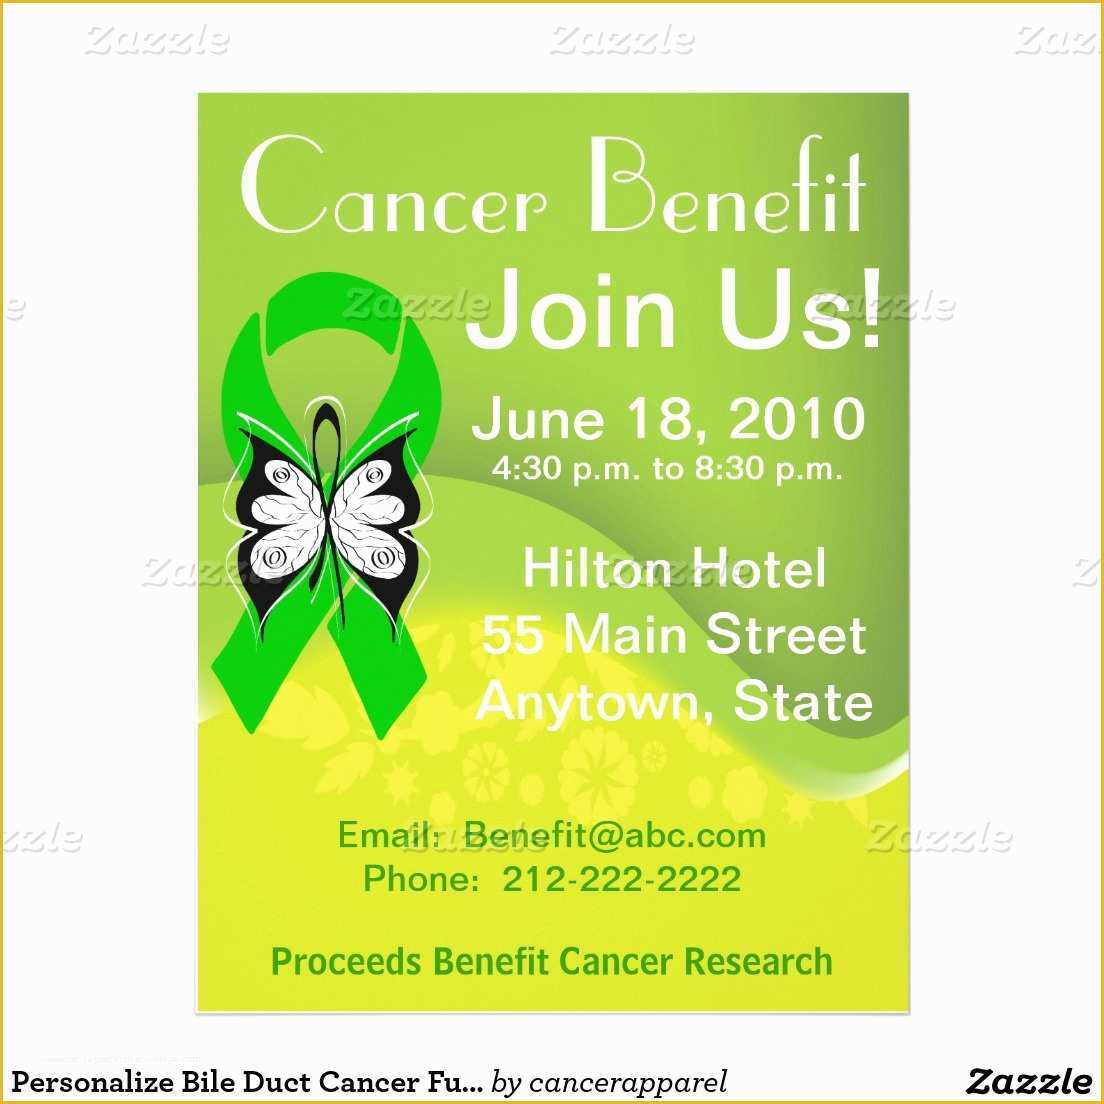 Fundraiser Flyer Template Free Of Personalize Bile Duct Cancer Fundraising Benefit Flyer